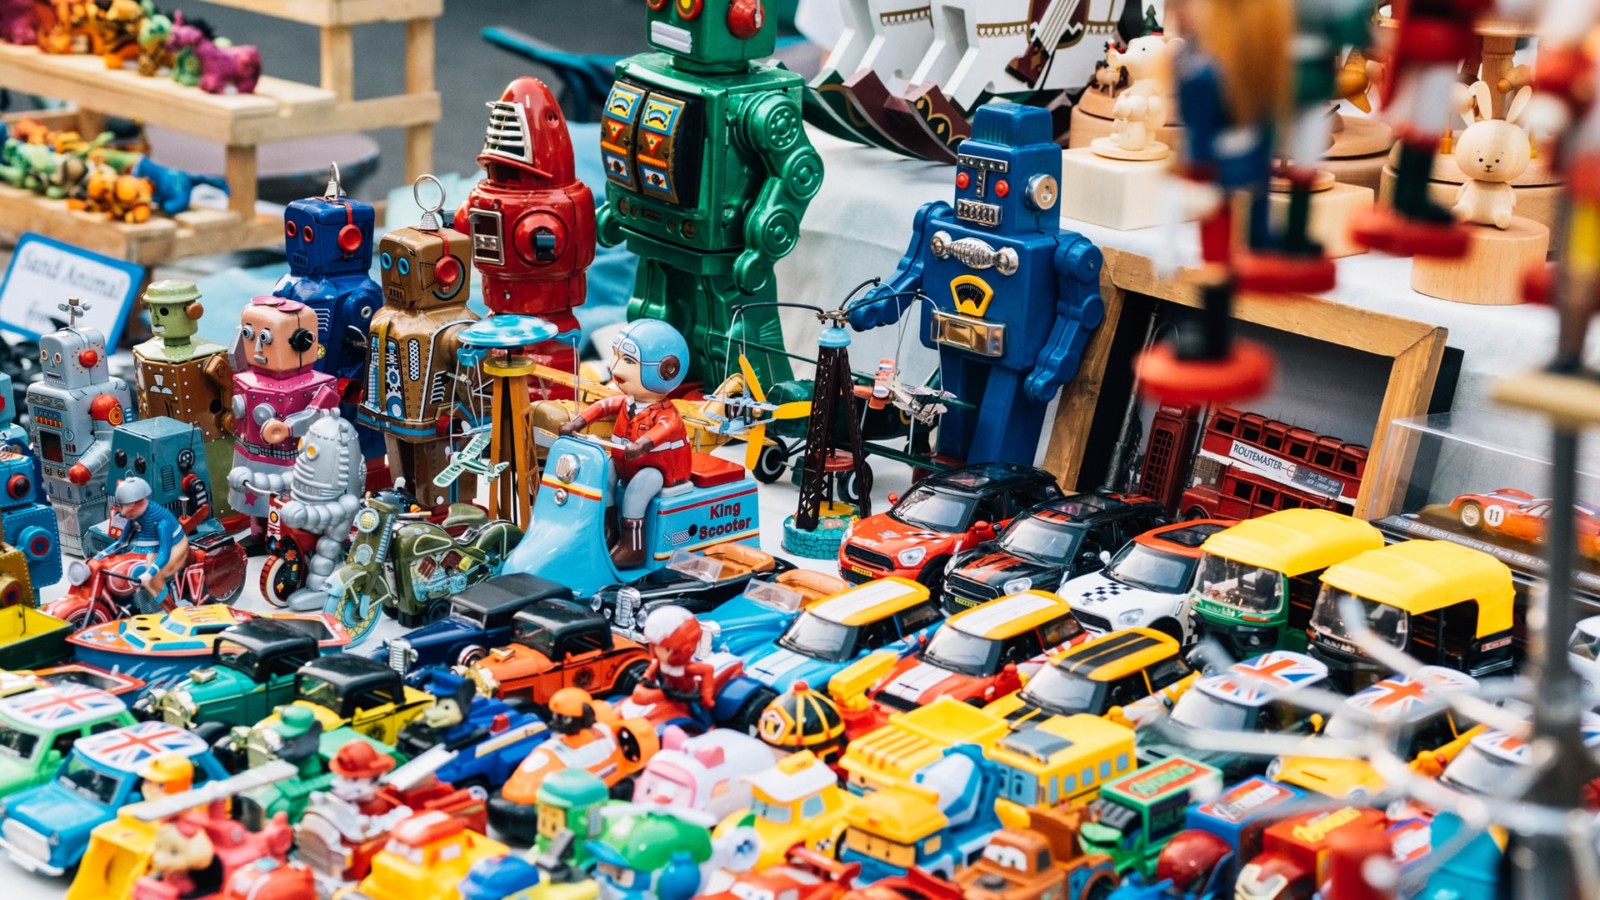 How to manage the toy clutter